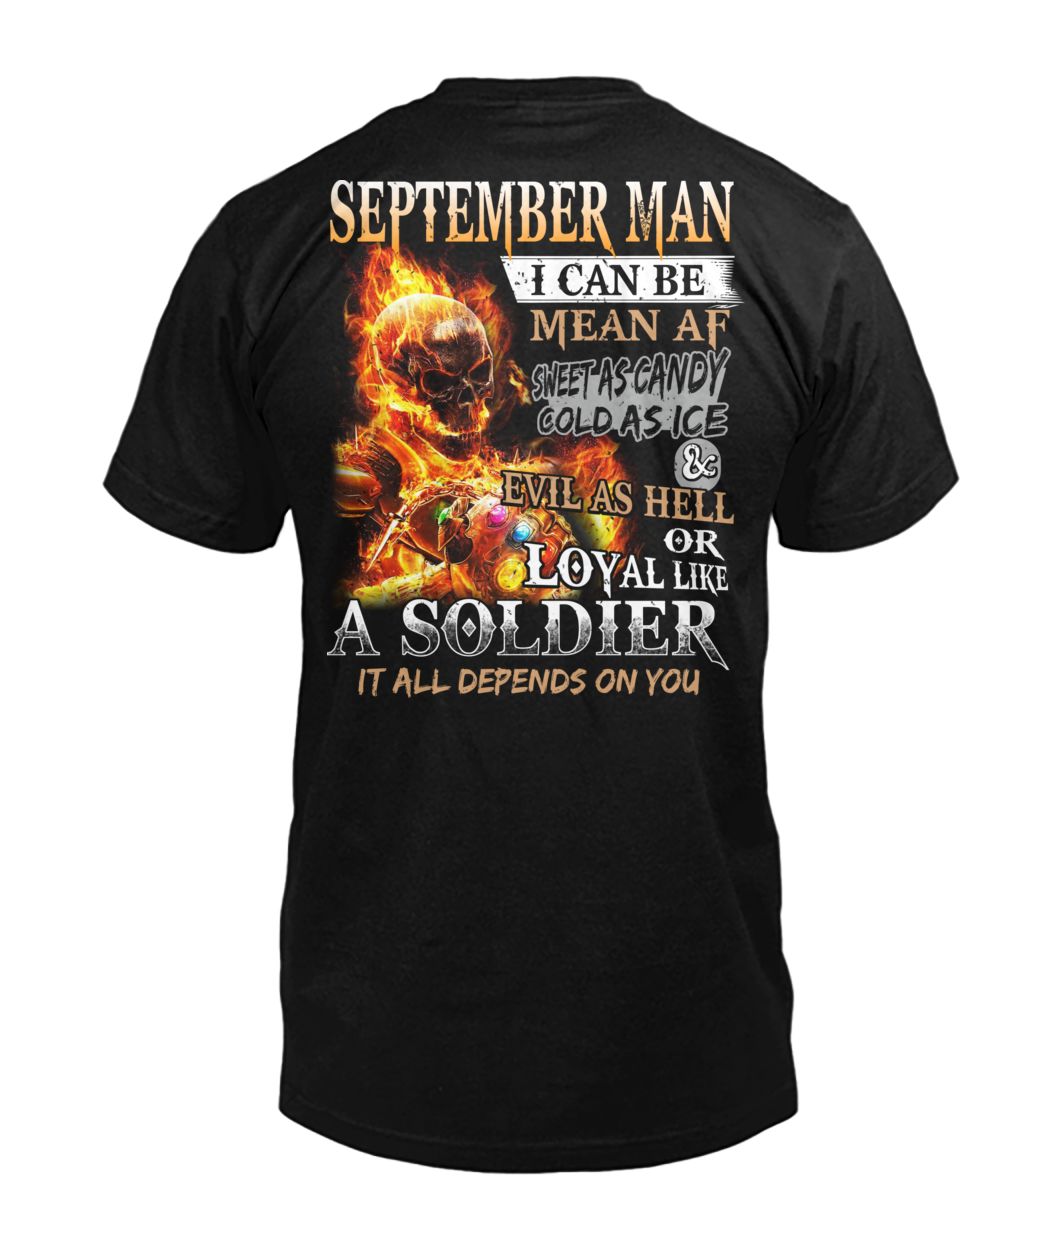 September man I can be mean af sweet as candy gold as ice and evil as hell mens v-neck